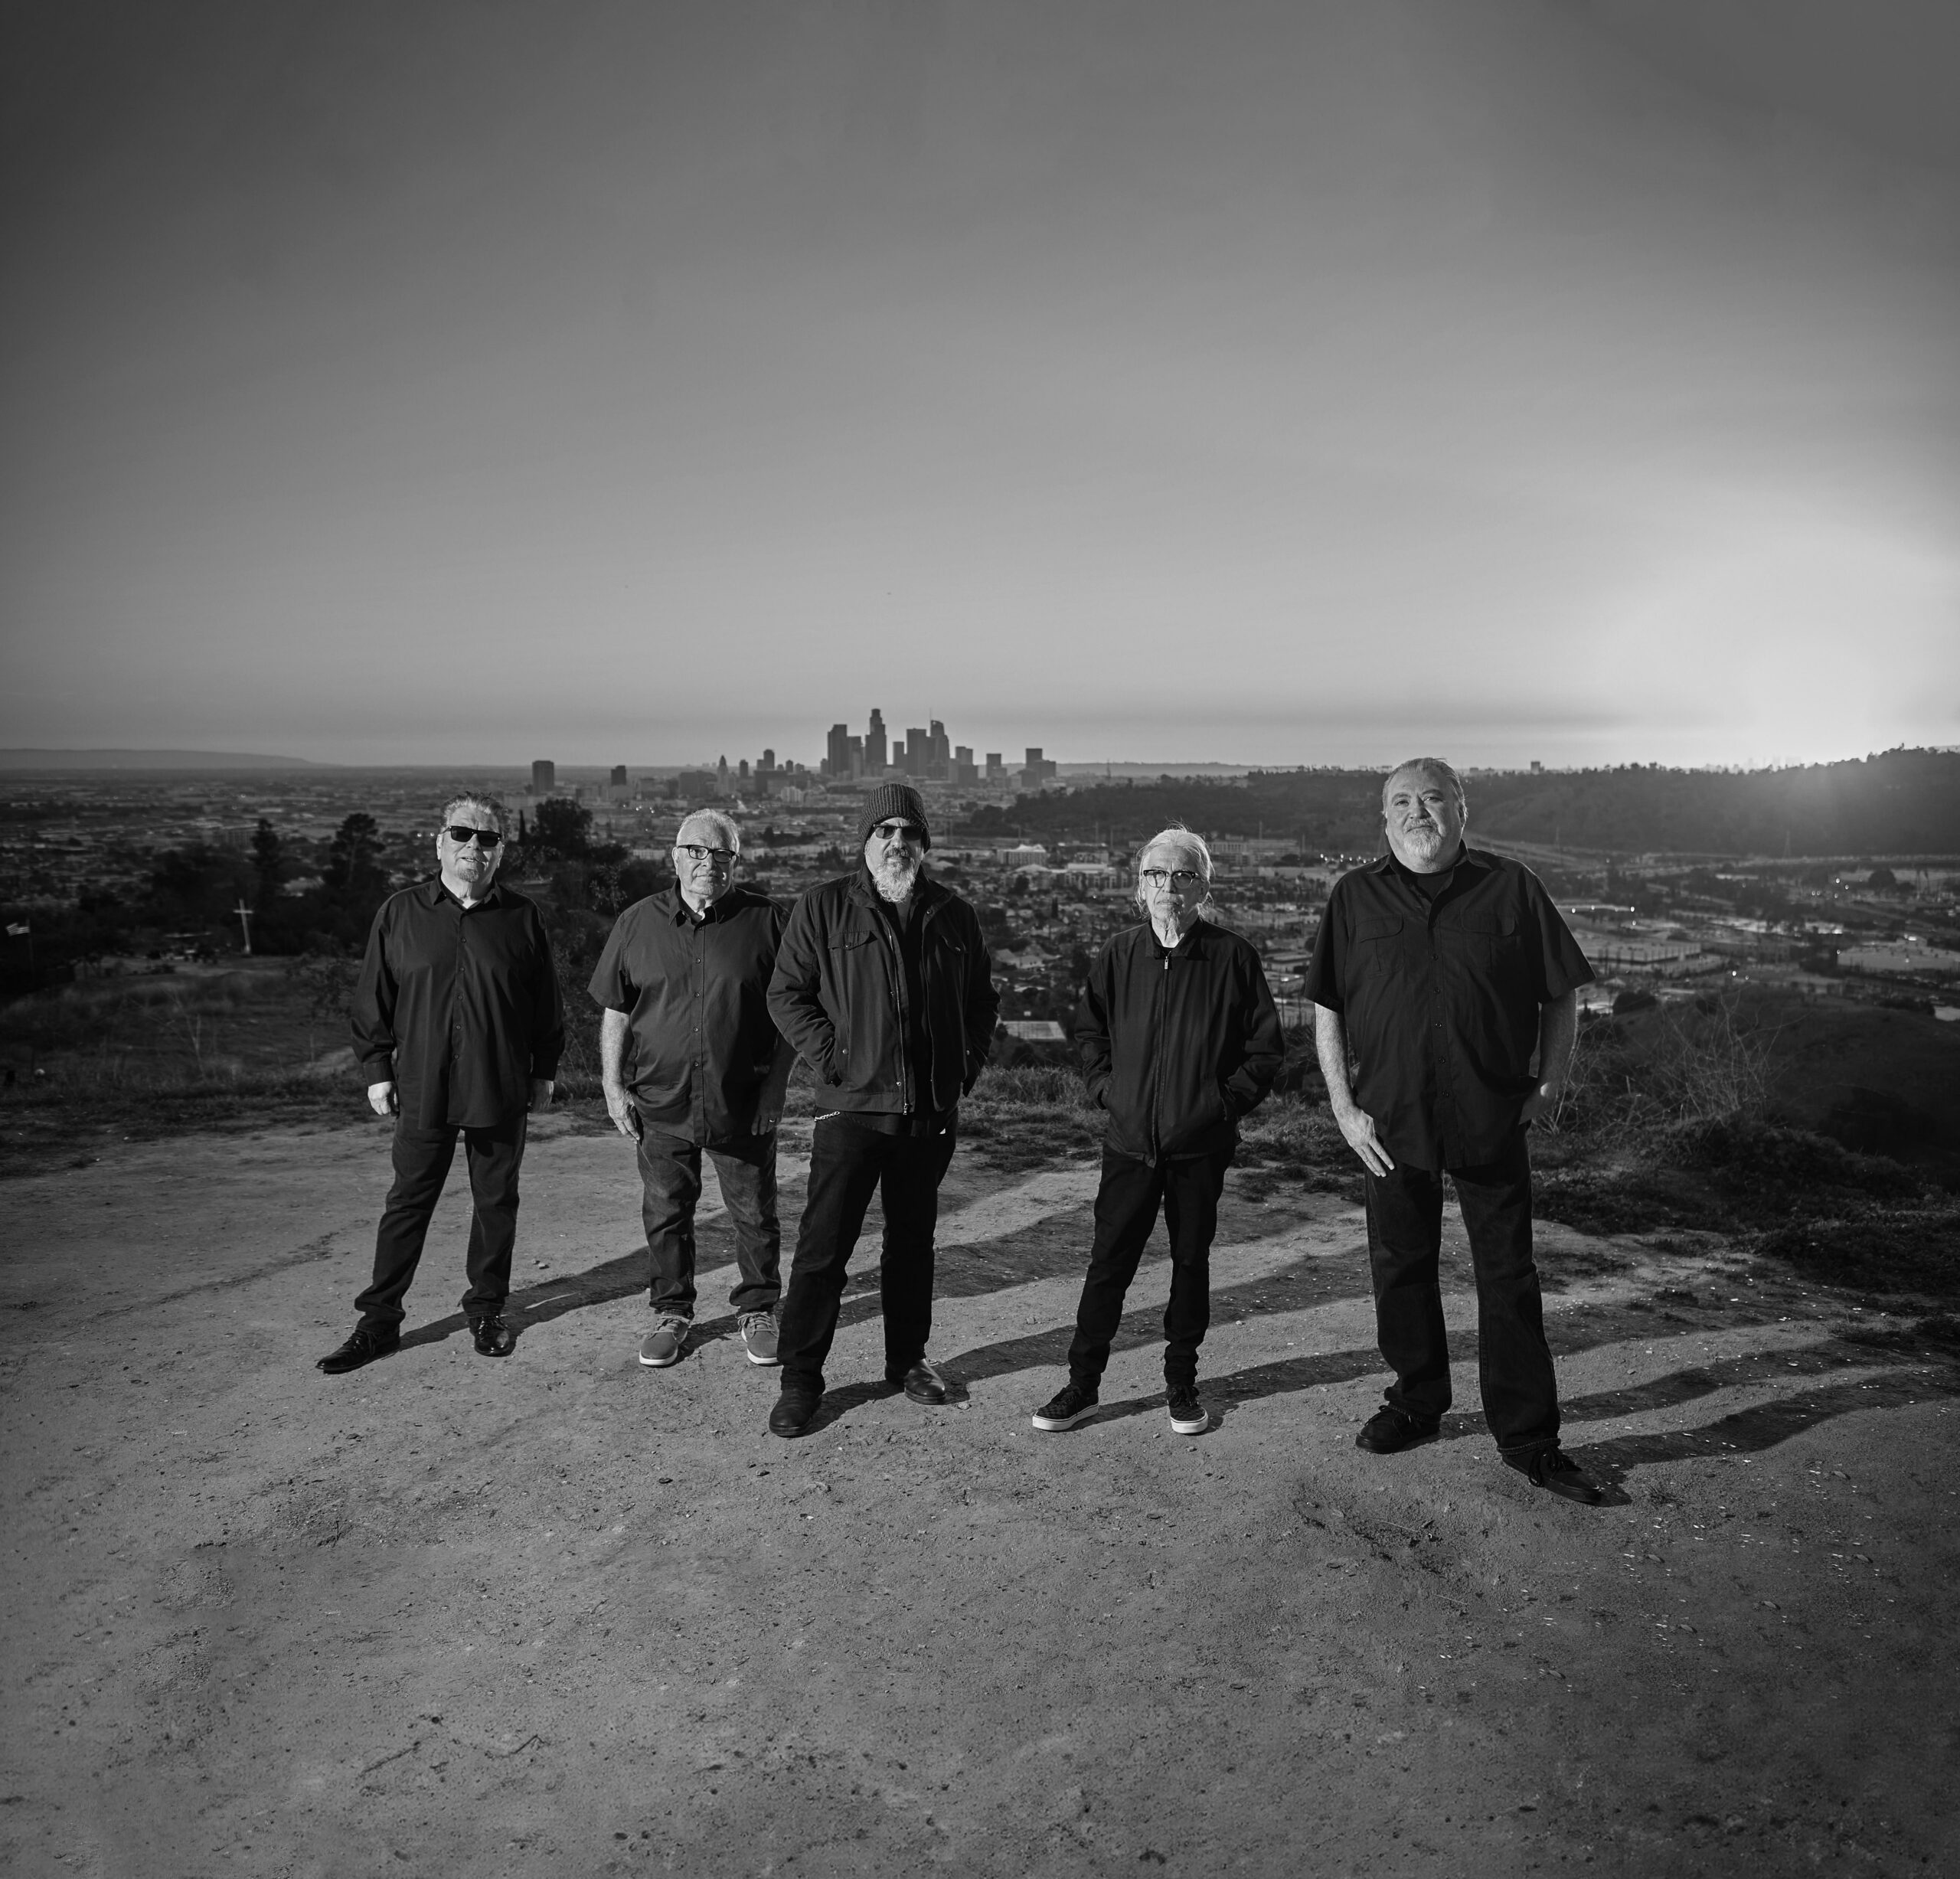 Los Lobos members stand together on a hill overlooking Los Angeles.